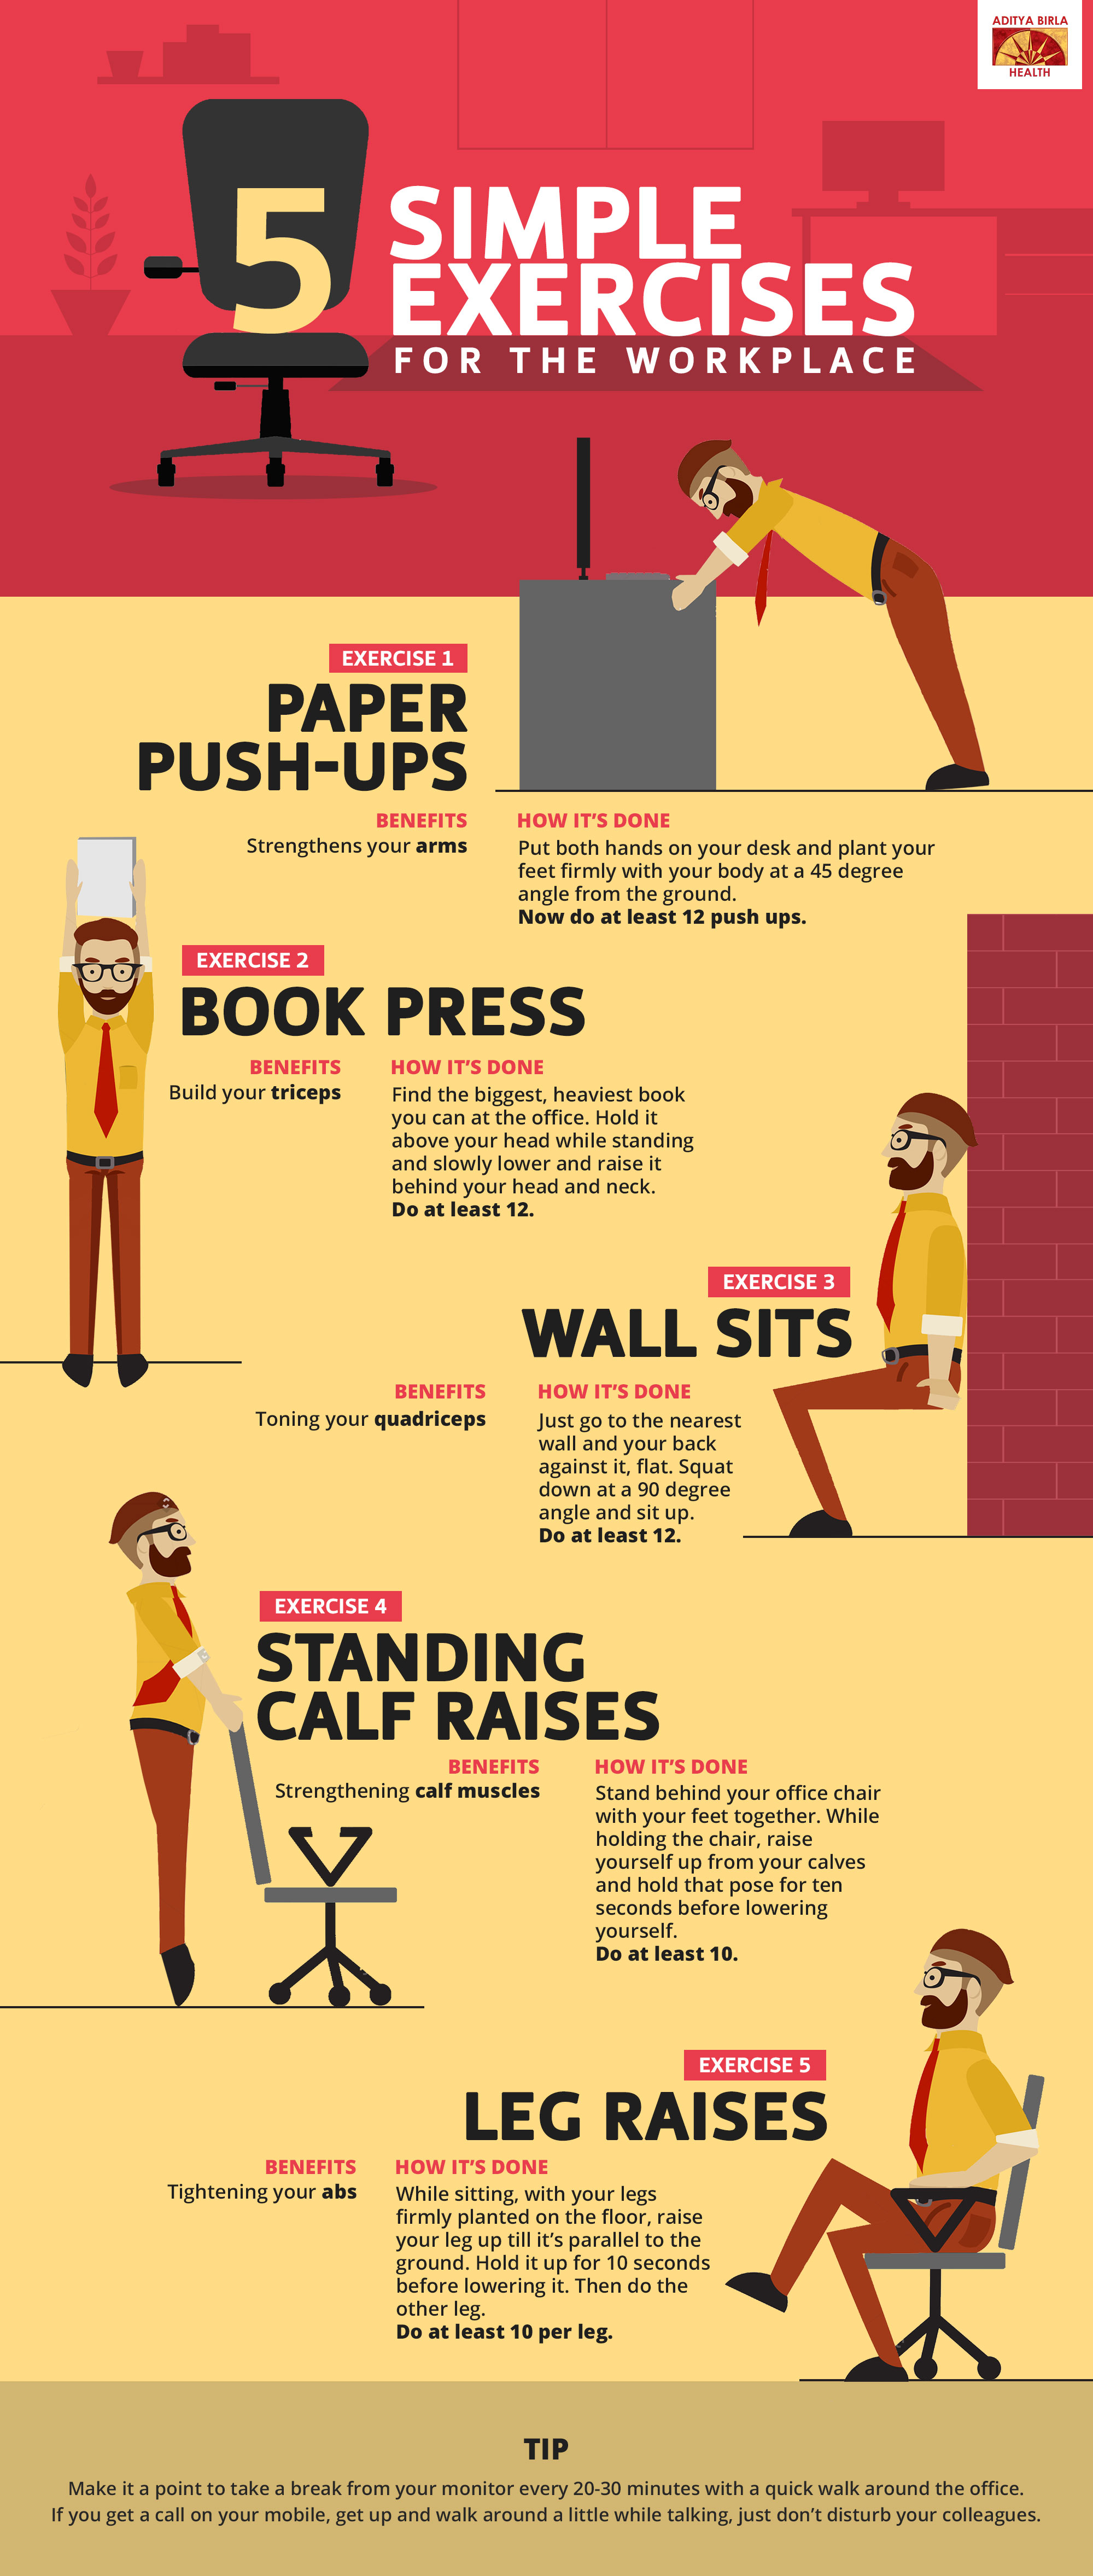 Check Out These Simple Exercises At Work To Remain Active - ACTIV